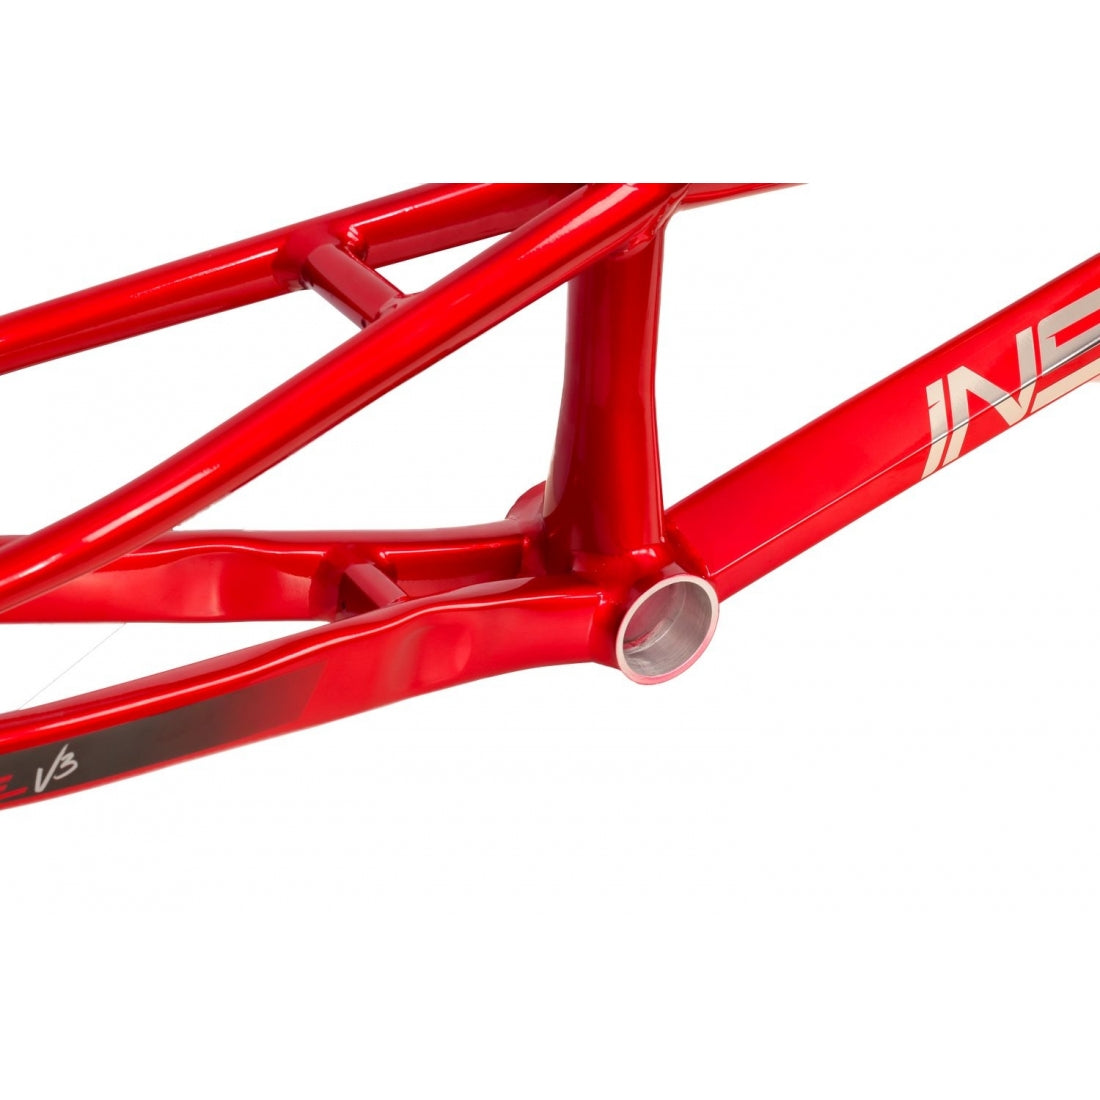 Close-up of a red Inspyre Concorde V3 Pro XXXXL bicycle frame against a white background.